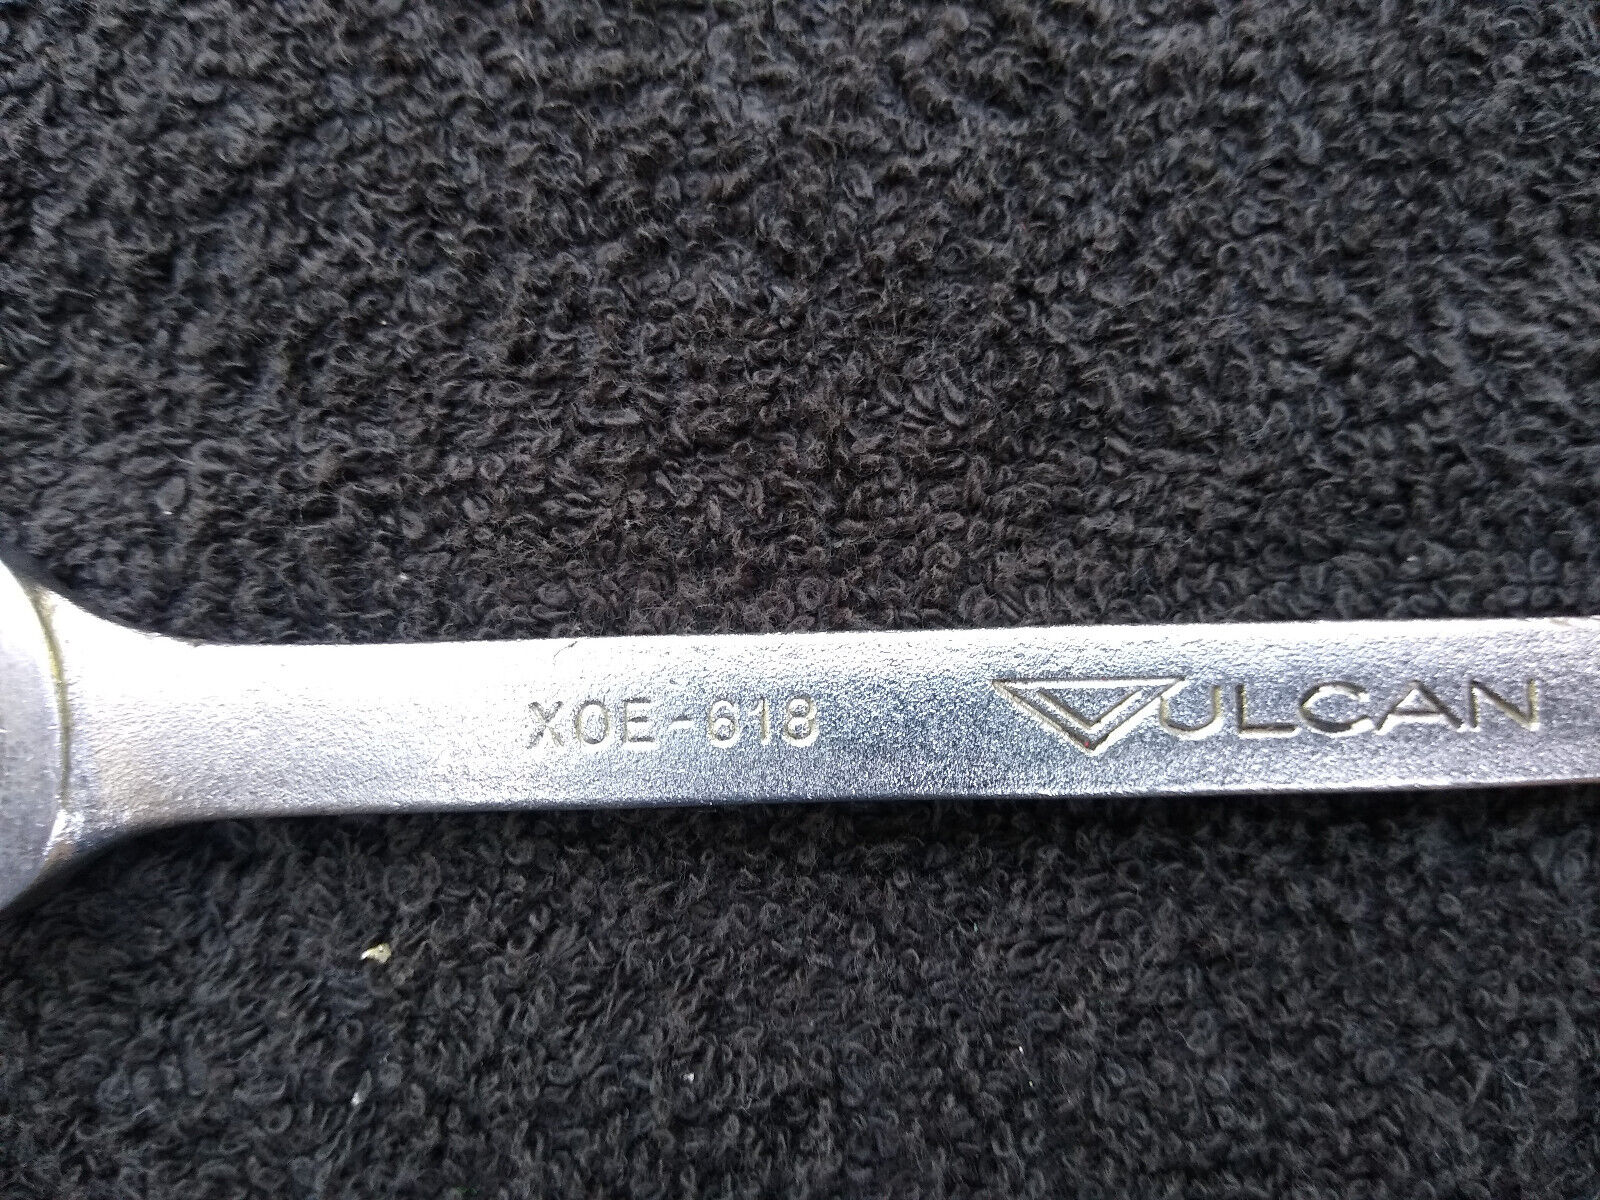 Vulcan XOE-618 Combination Wrench, 9/16 Inch Vintage